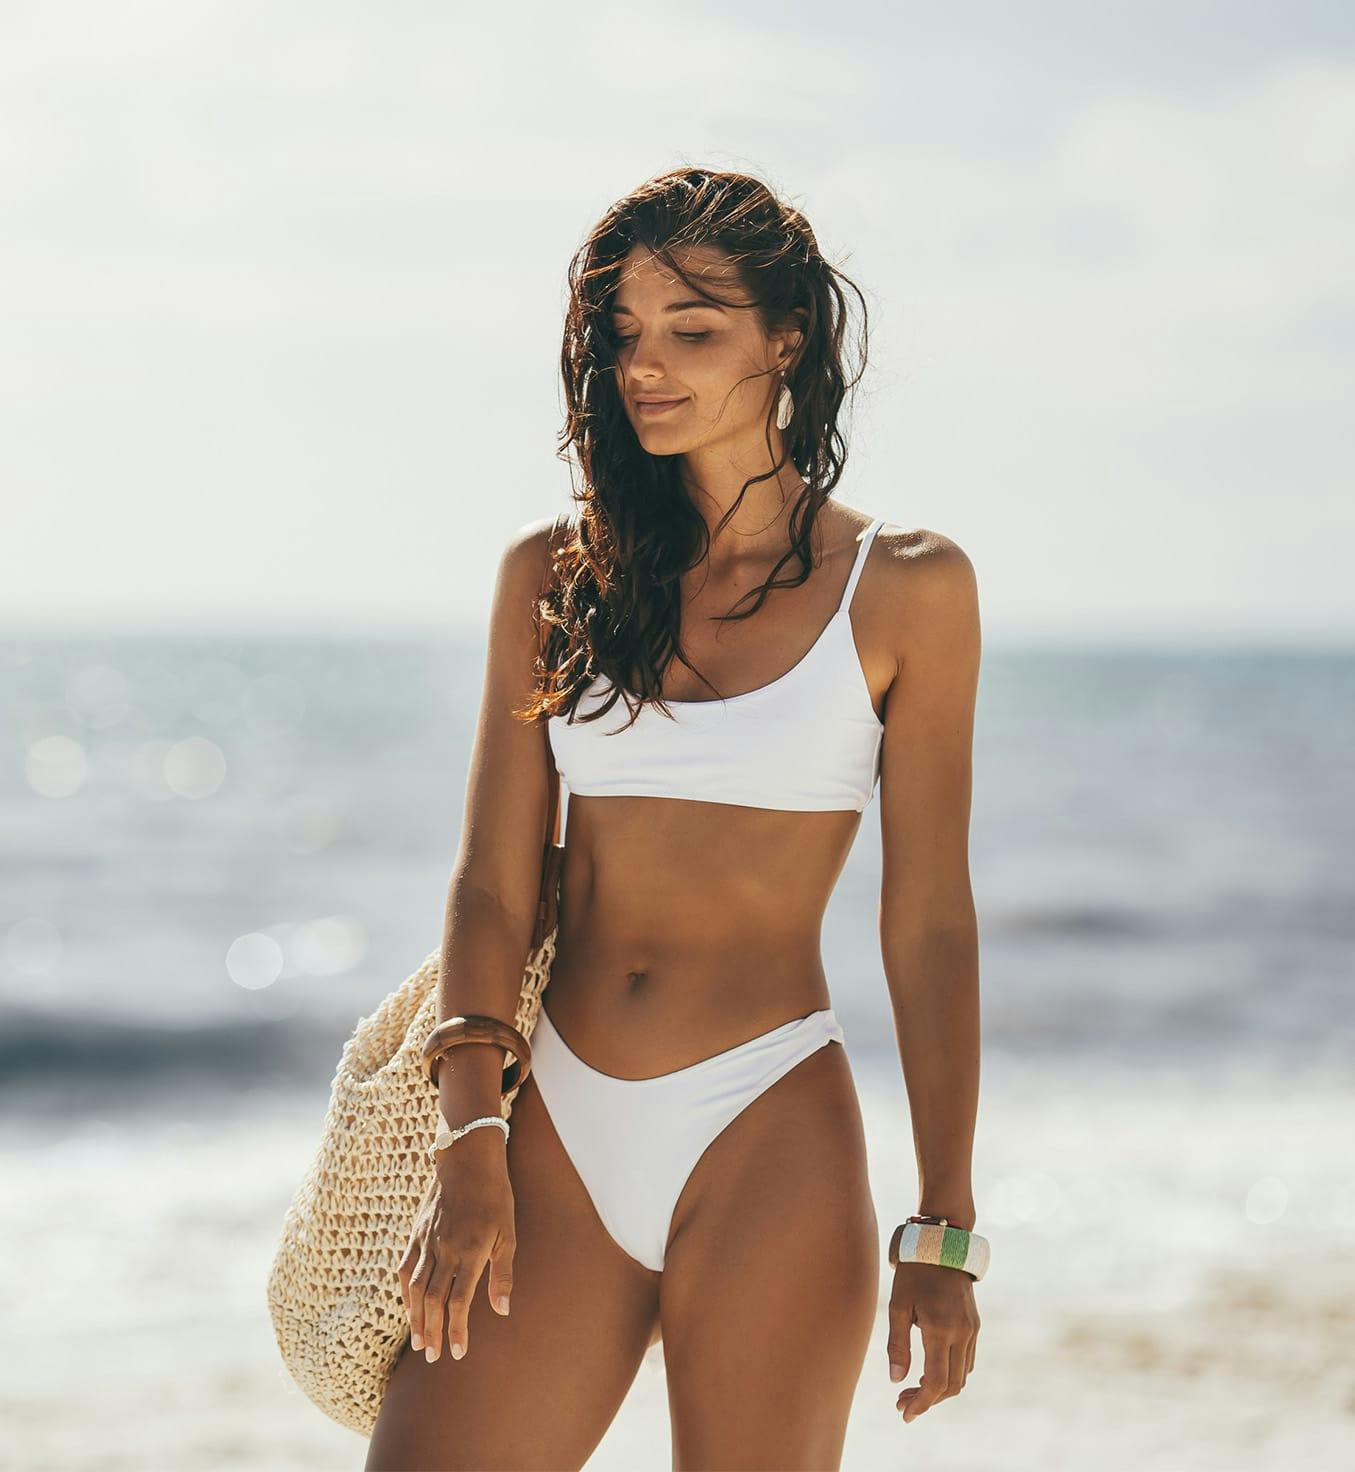 Woman wearing a white bathing suit